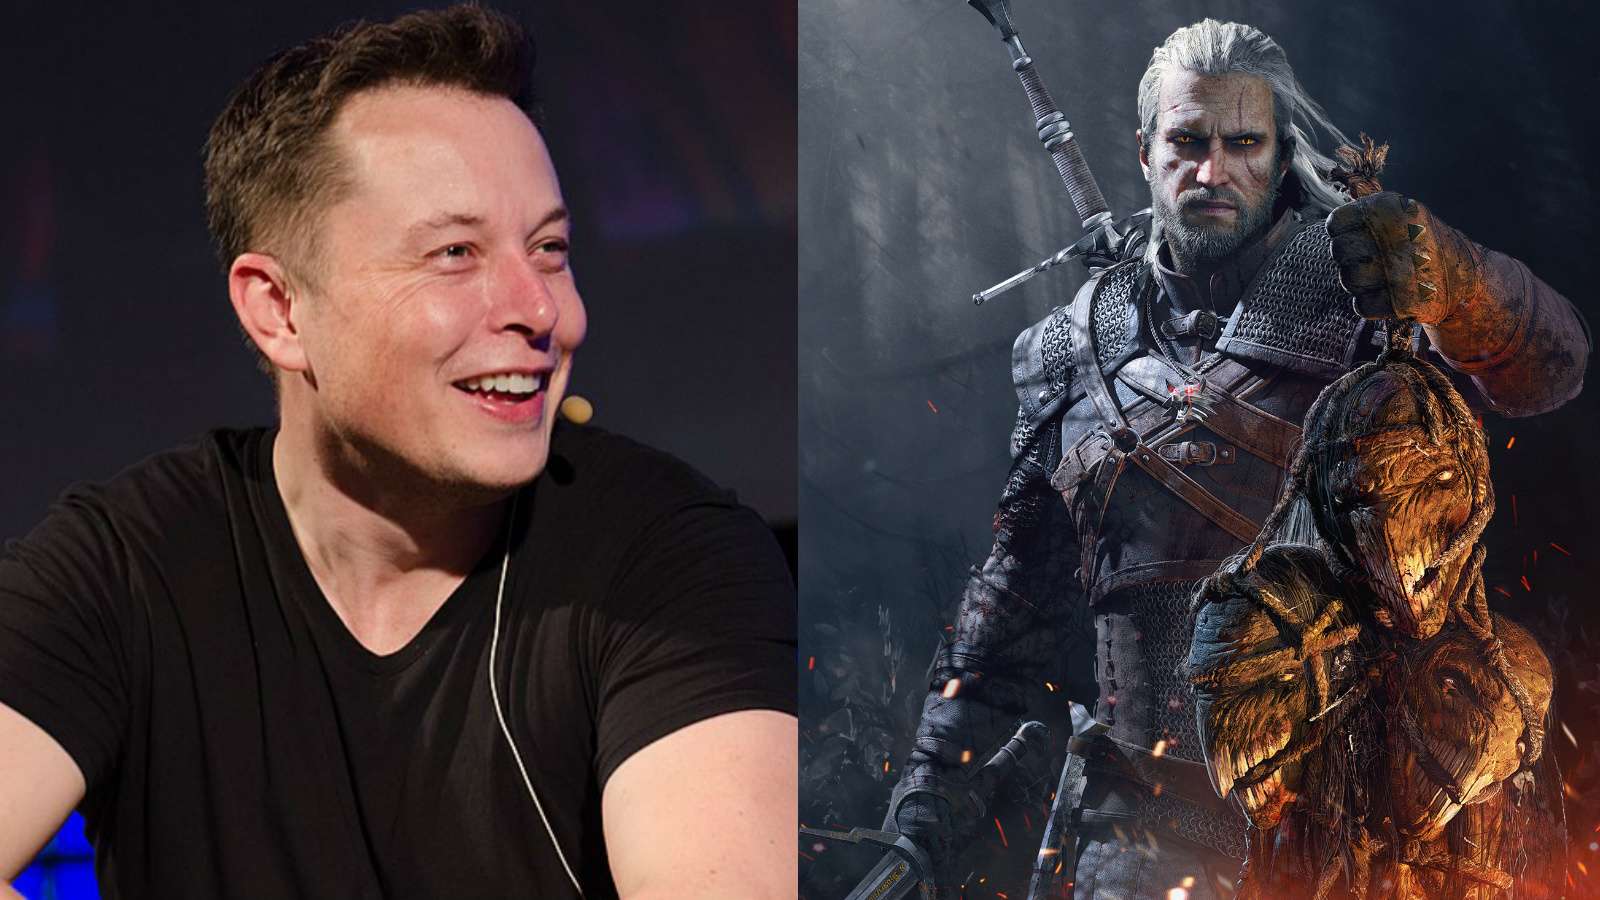 An image of Elon Musk and Geralt from The Witcher